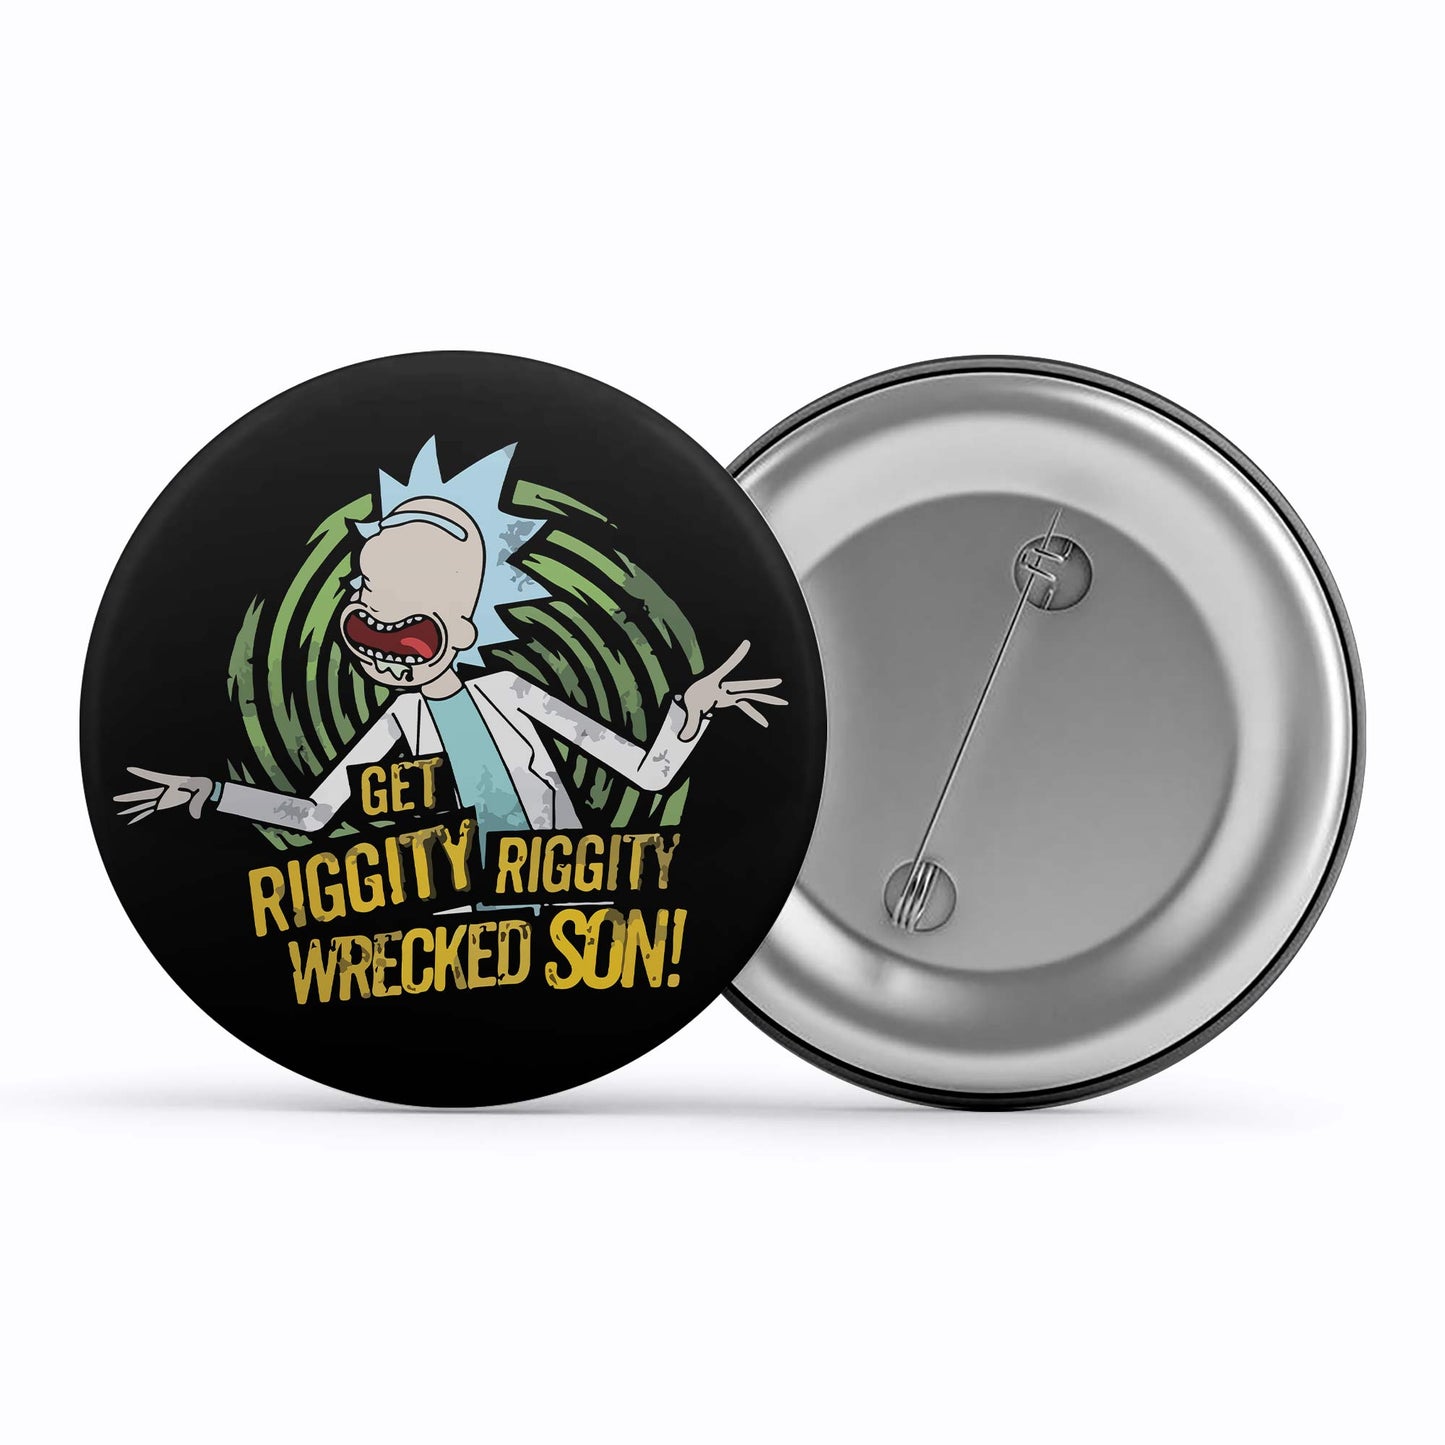 rick and morty riggity badge pin button buy online india the banyan tee tbt men women girls boys unisex  rick and morty online summer beth mr meeseeks jerry quote vector art clothing accessories merchandise